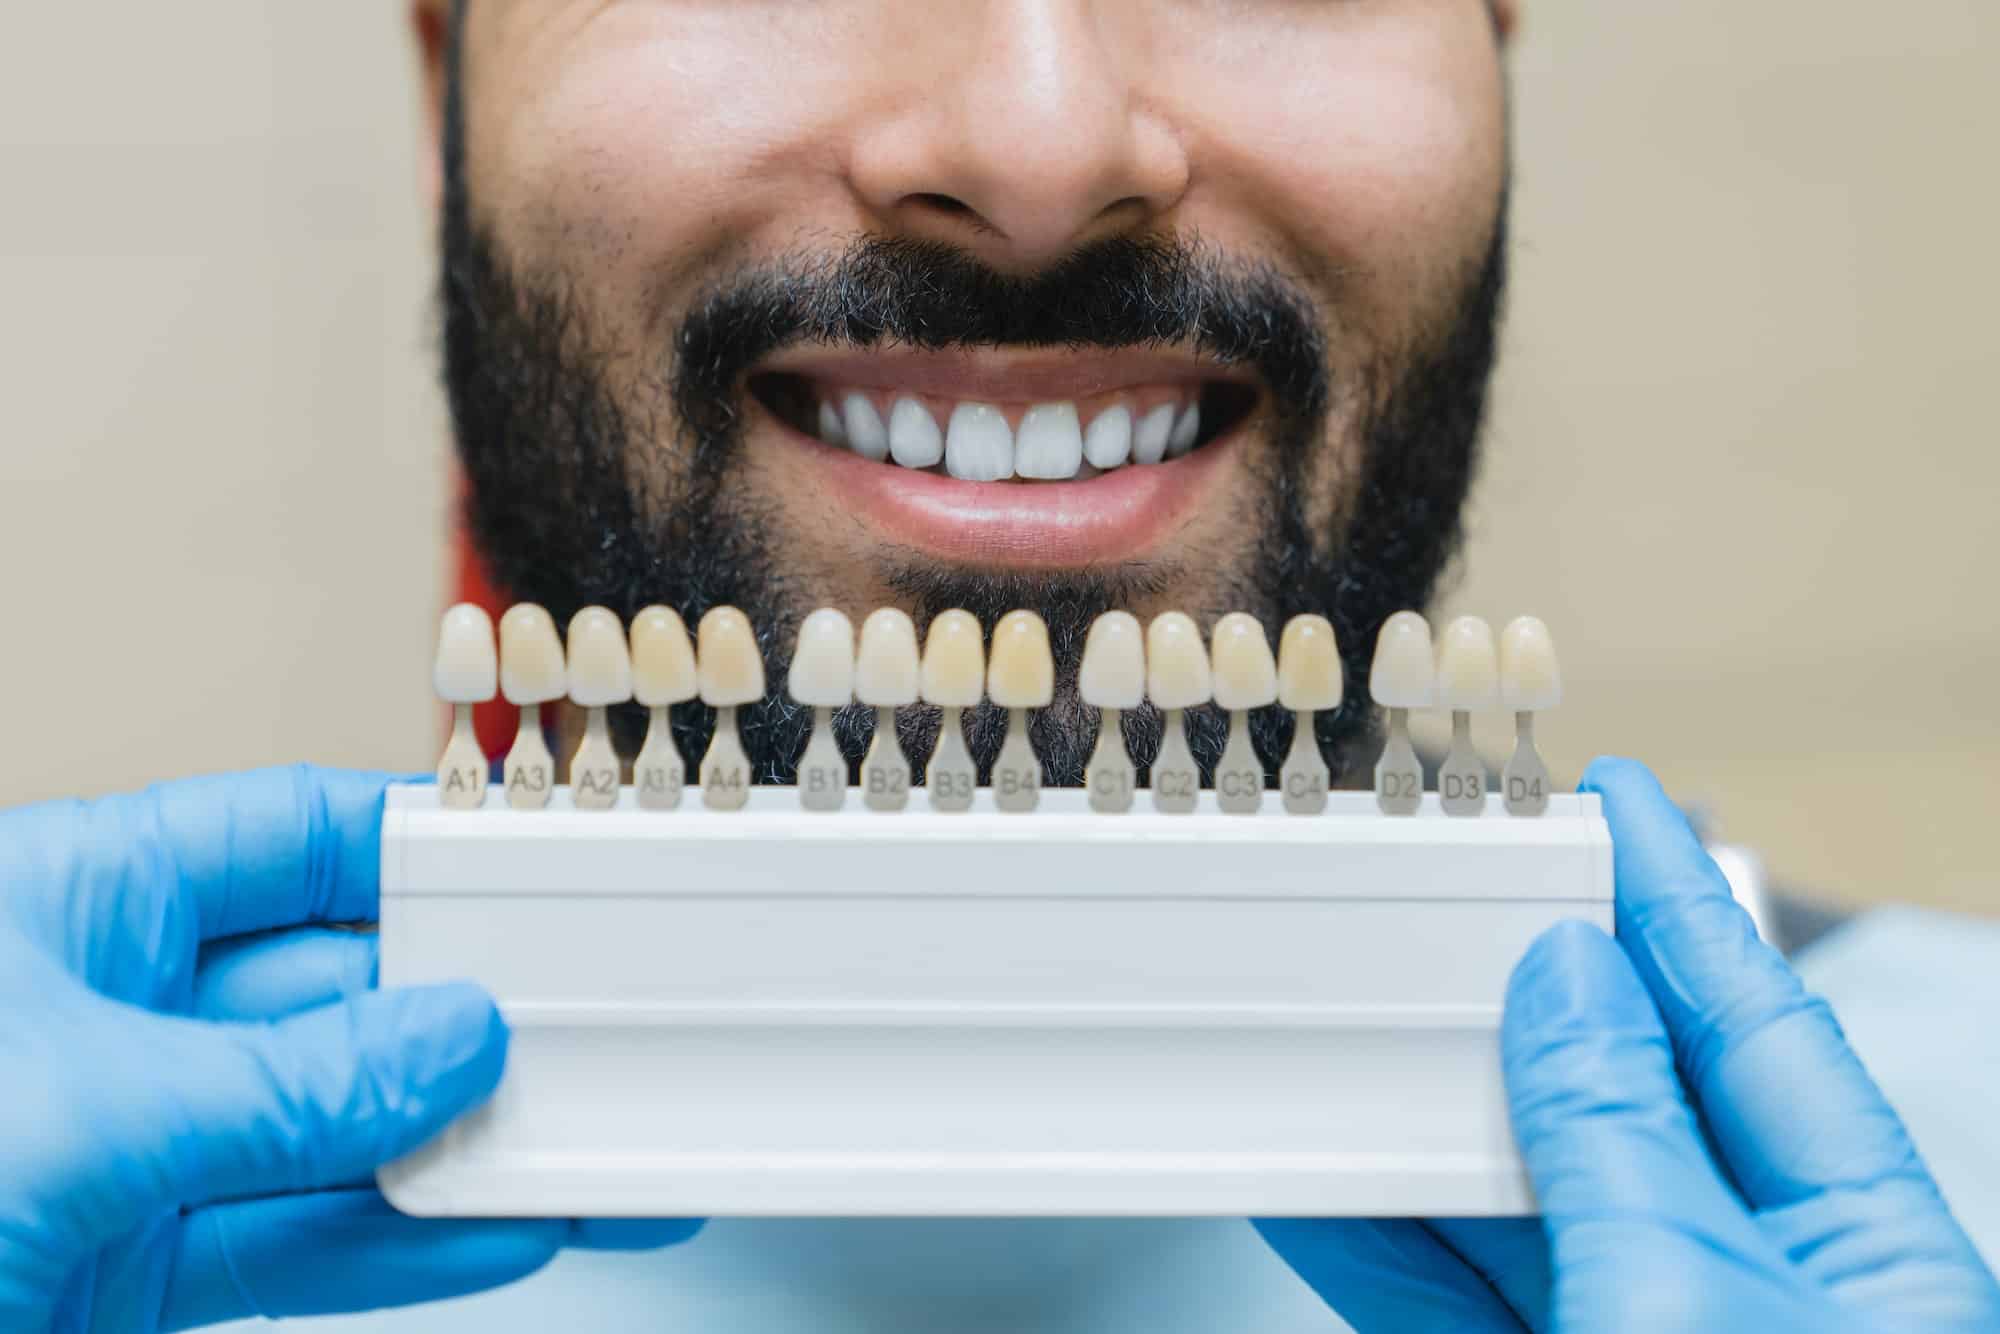 Dental care, implants for veneers. Man with perfect smile choosing teeth tooth tone at dental clinic